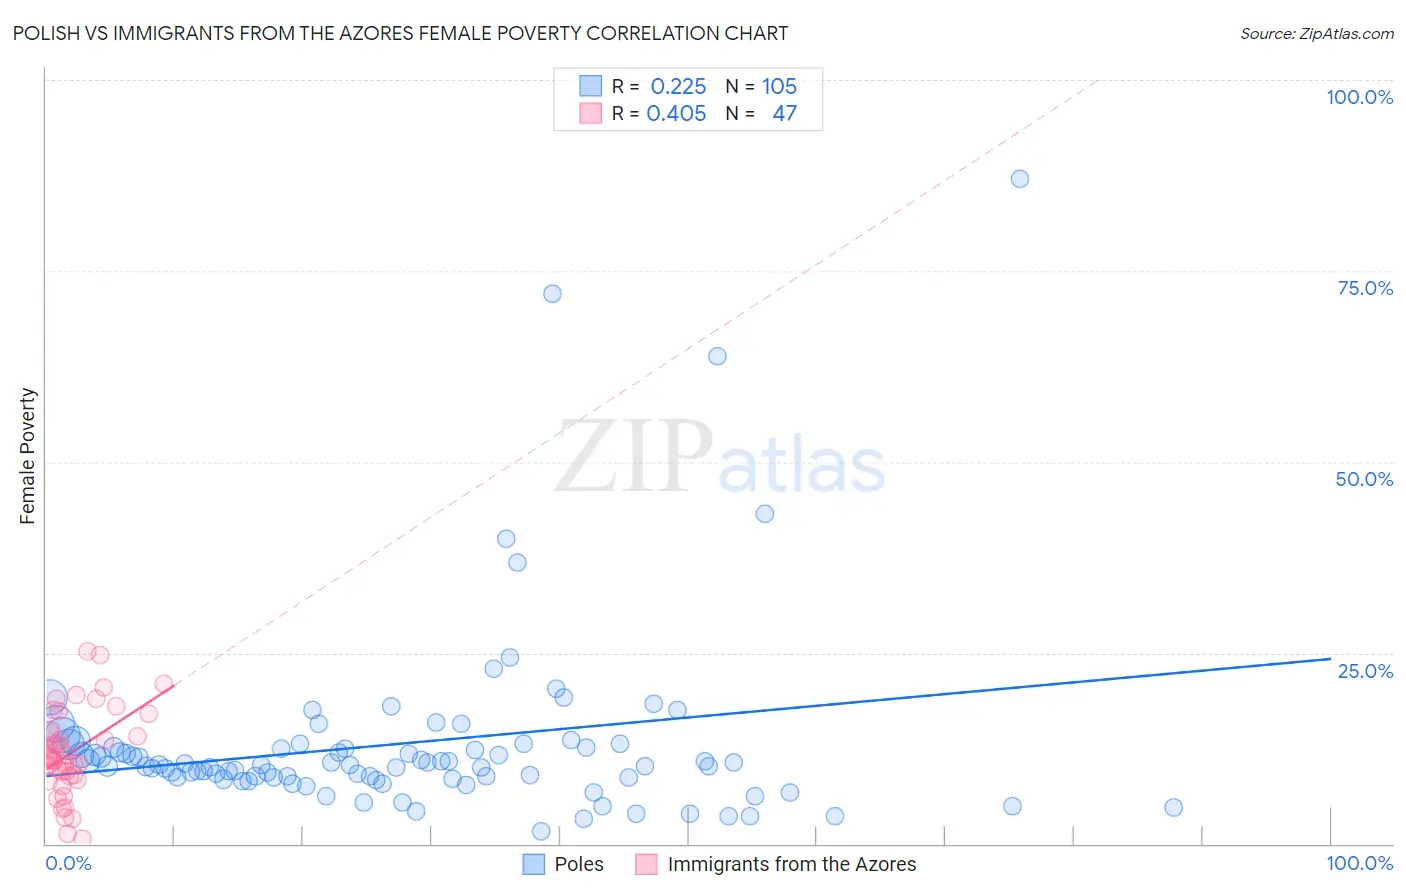 Polish vs Immigrants from the Azores Female Poverty